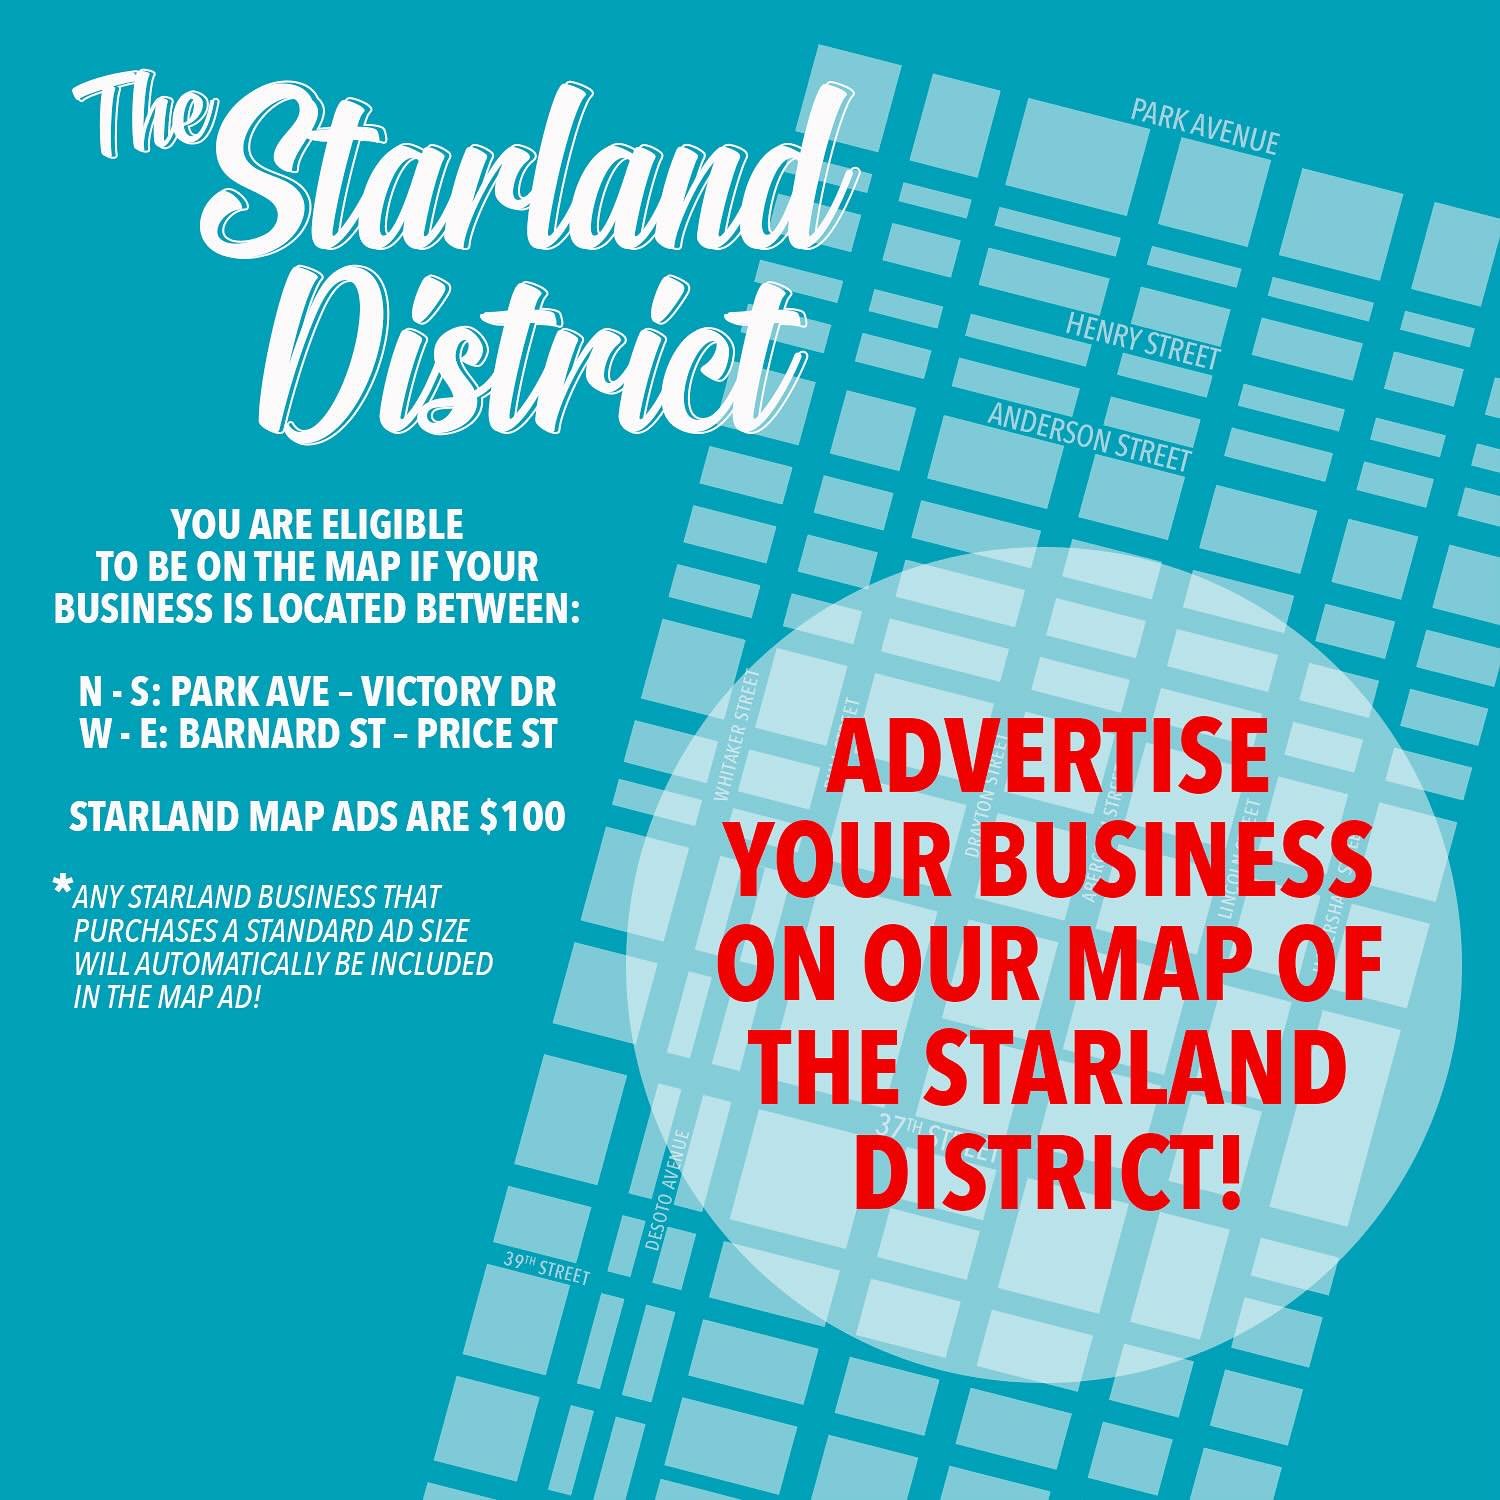 Feature your Starland District business on the map in IMPACT Arts + Culture Magazine! @impact.magazine.sav 

2024 PRINT ISSUE DATES:

🌸Spring/Summer, Vol. 3 No. 1 &ndash; Ads Close: April 17  Available: June 7 

🍁Fall/Winter, Vol. 3 No. 2 &ndash; A